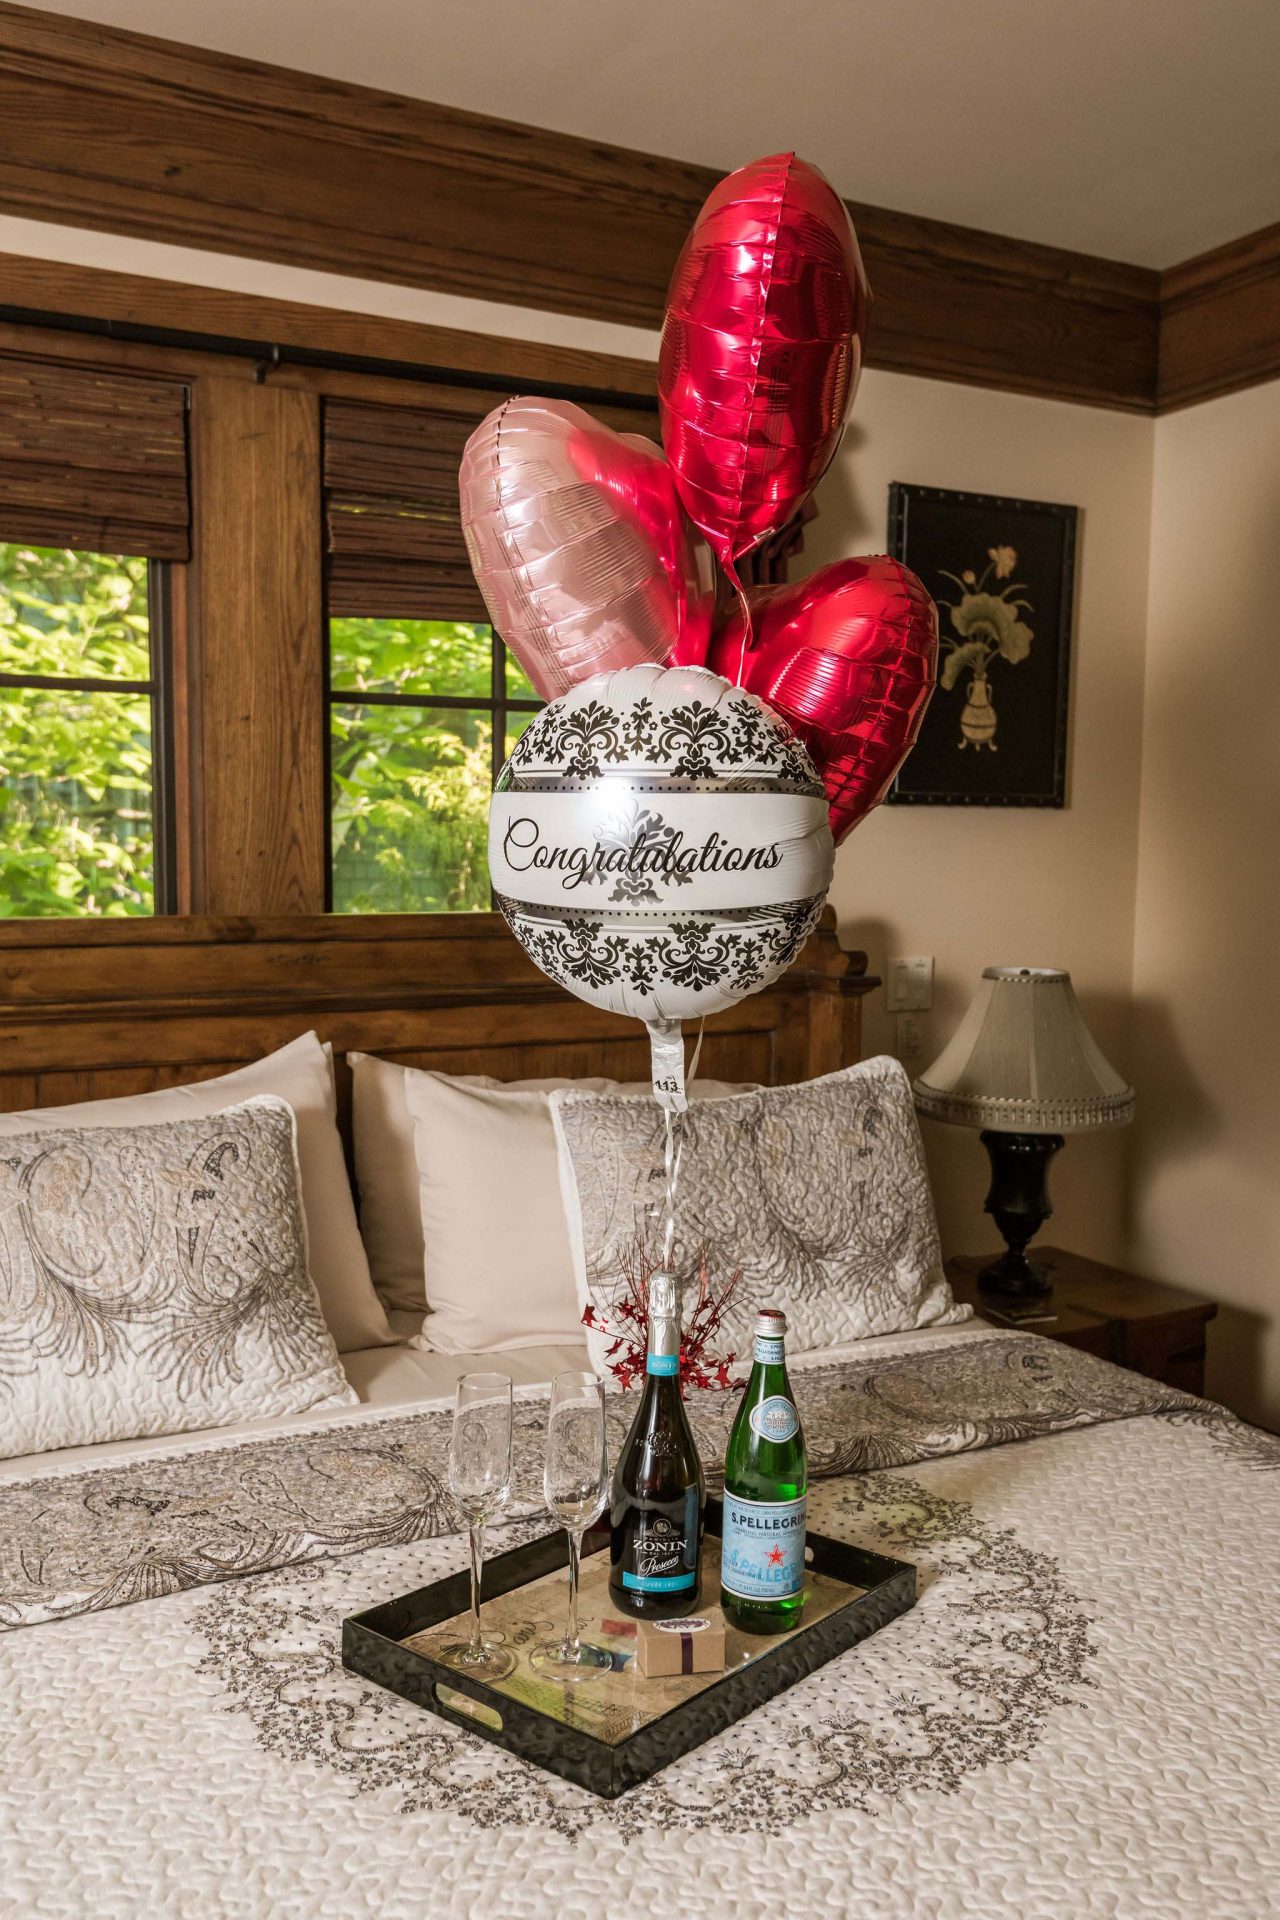 White and red heart-shaped balooons tied to a tray with a prosecco bottle, water bottle, chocolate truffles, and champagne glasses, arranged on a king bed.